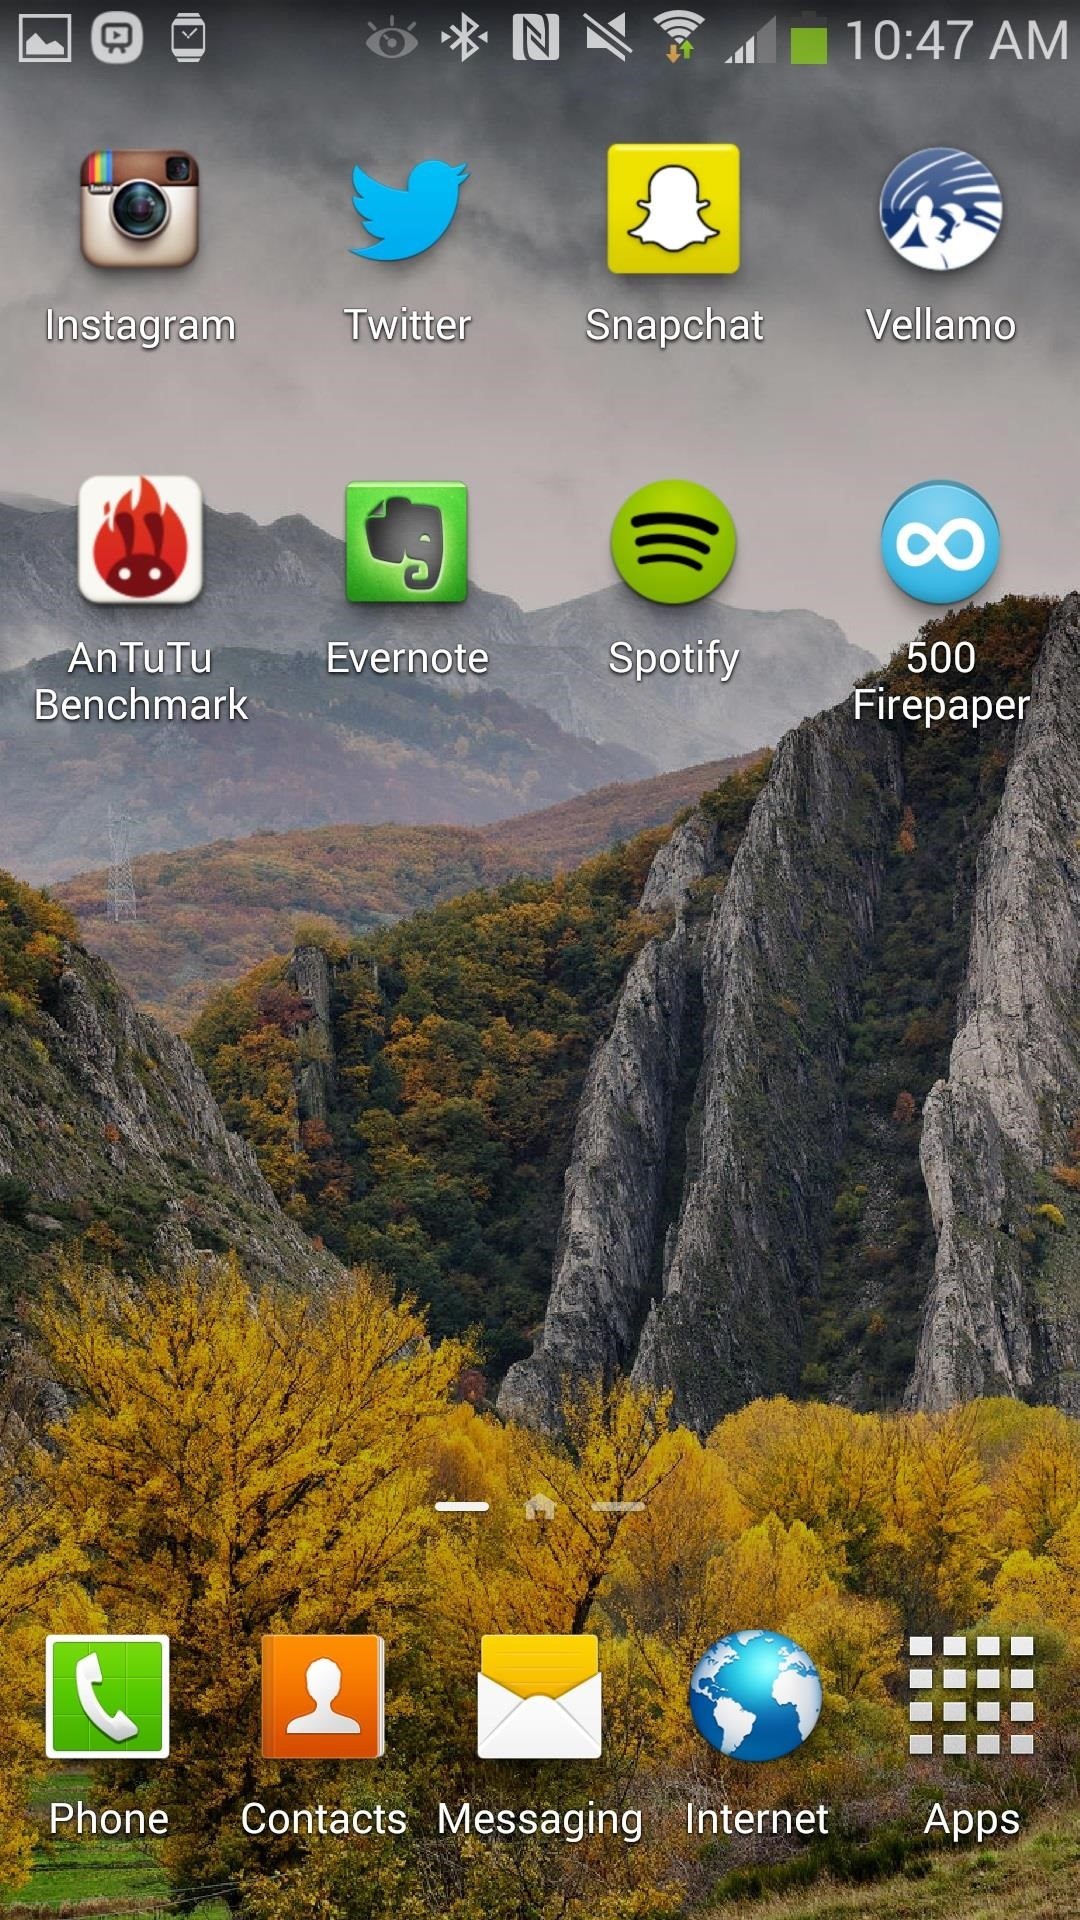 This Energy-Saving Live Wallpaper Gives Your Android Home Screen a Fresh Look Whenever You Want